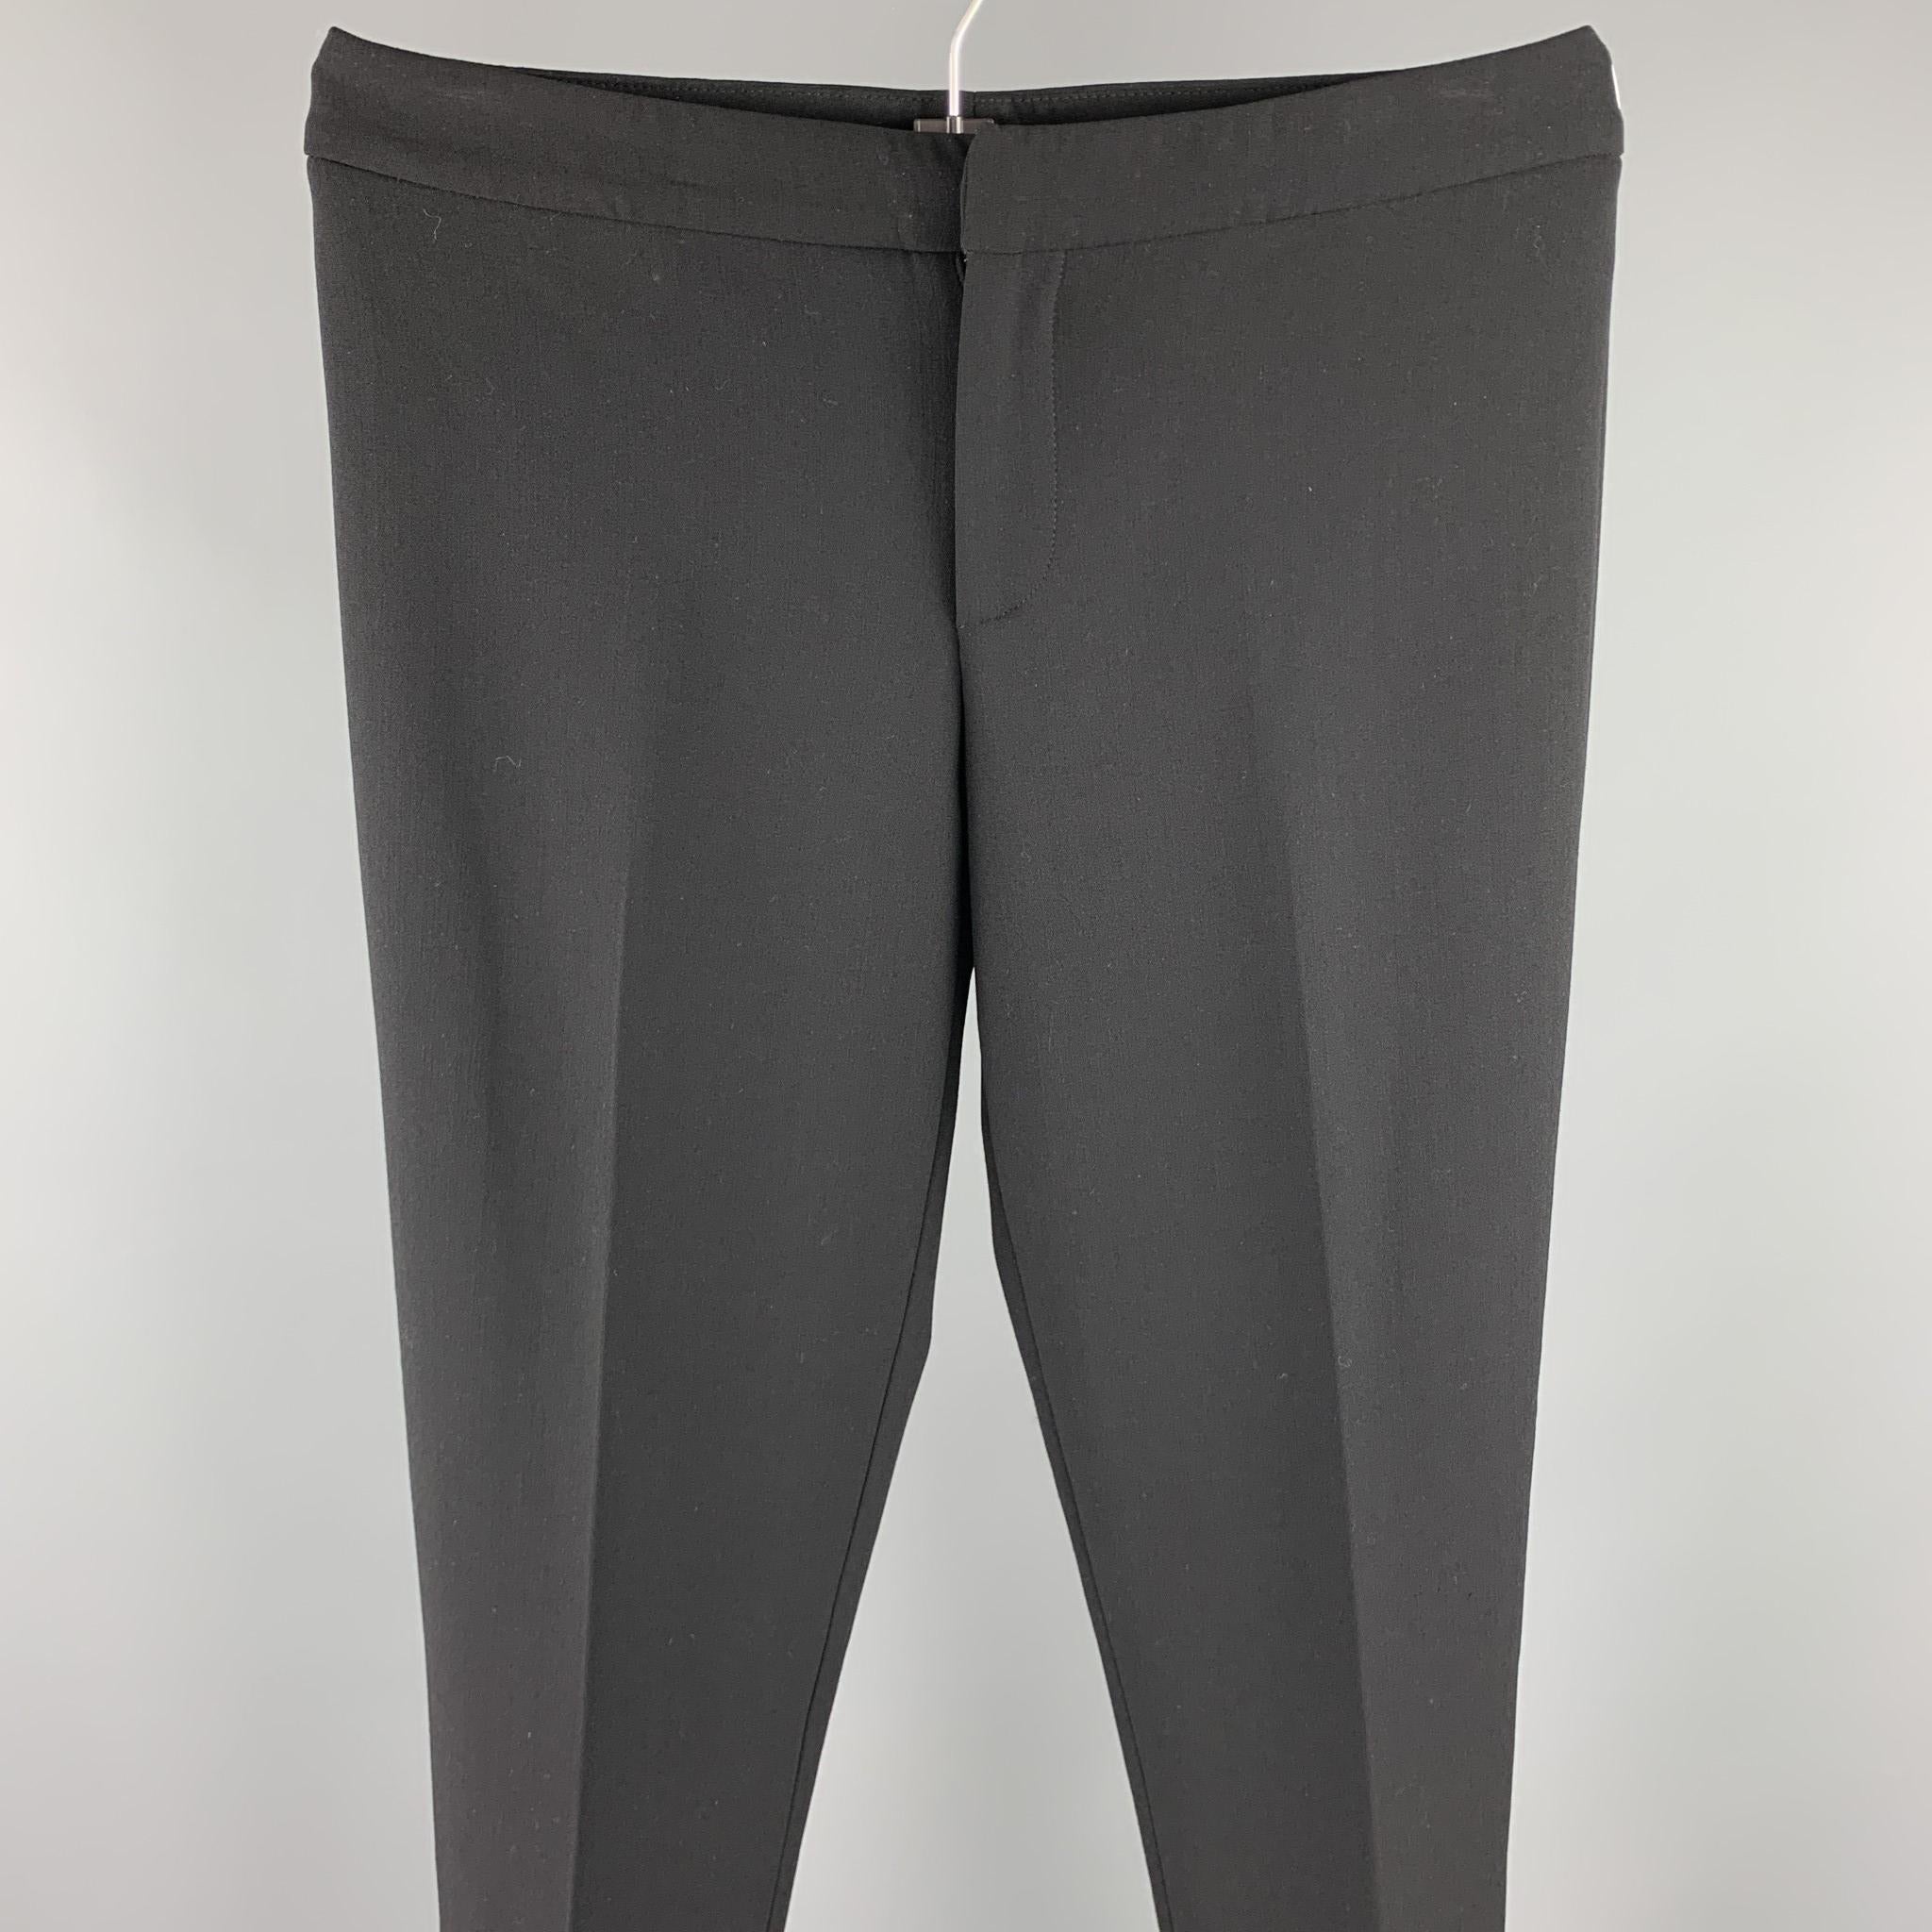 RALPH LAUREN COLLECTION dress pants comes in a black fabric featuring a straight leg, front tab, and a zip fly closure.

Excellent Pre-Owned Condition.
Marked: 6
Original Retail Price: $998.00

Measurements:

Waist: 32 in. 
Rise: 8.5 in. 
Inseam: 31